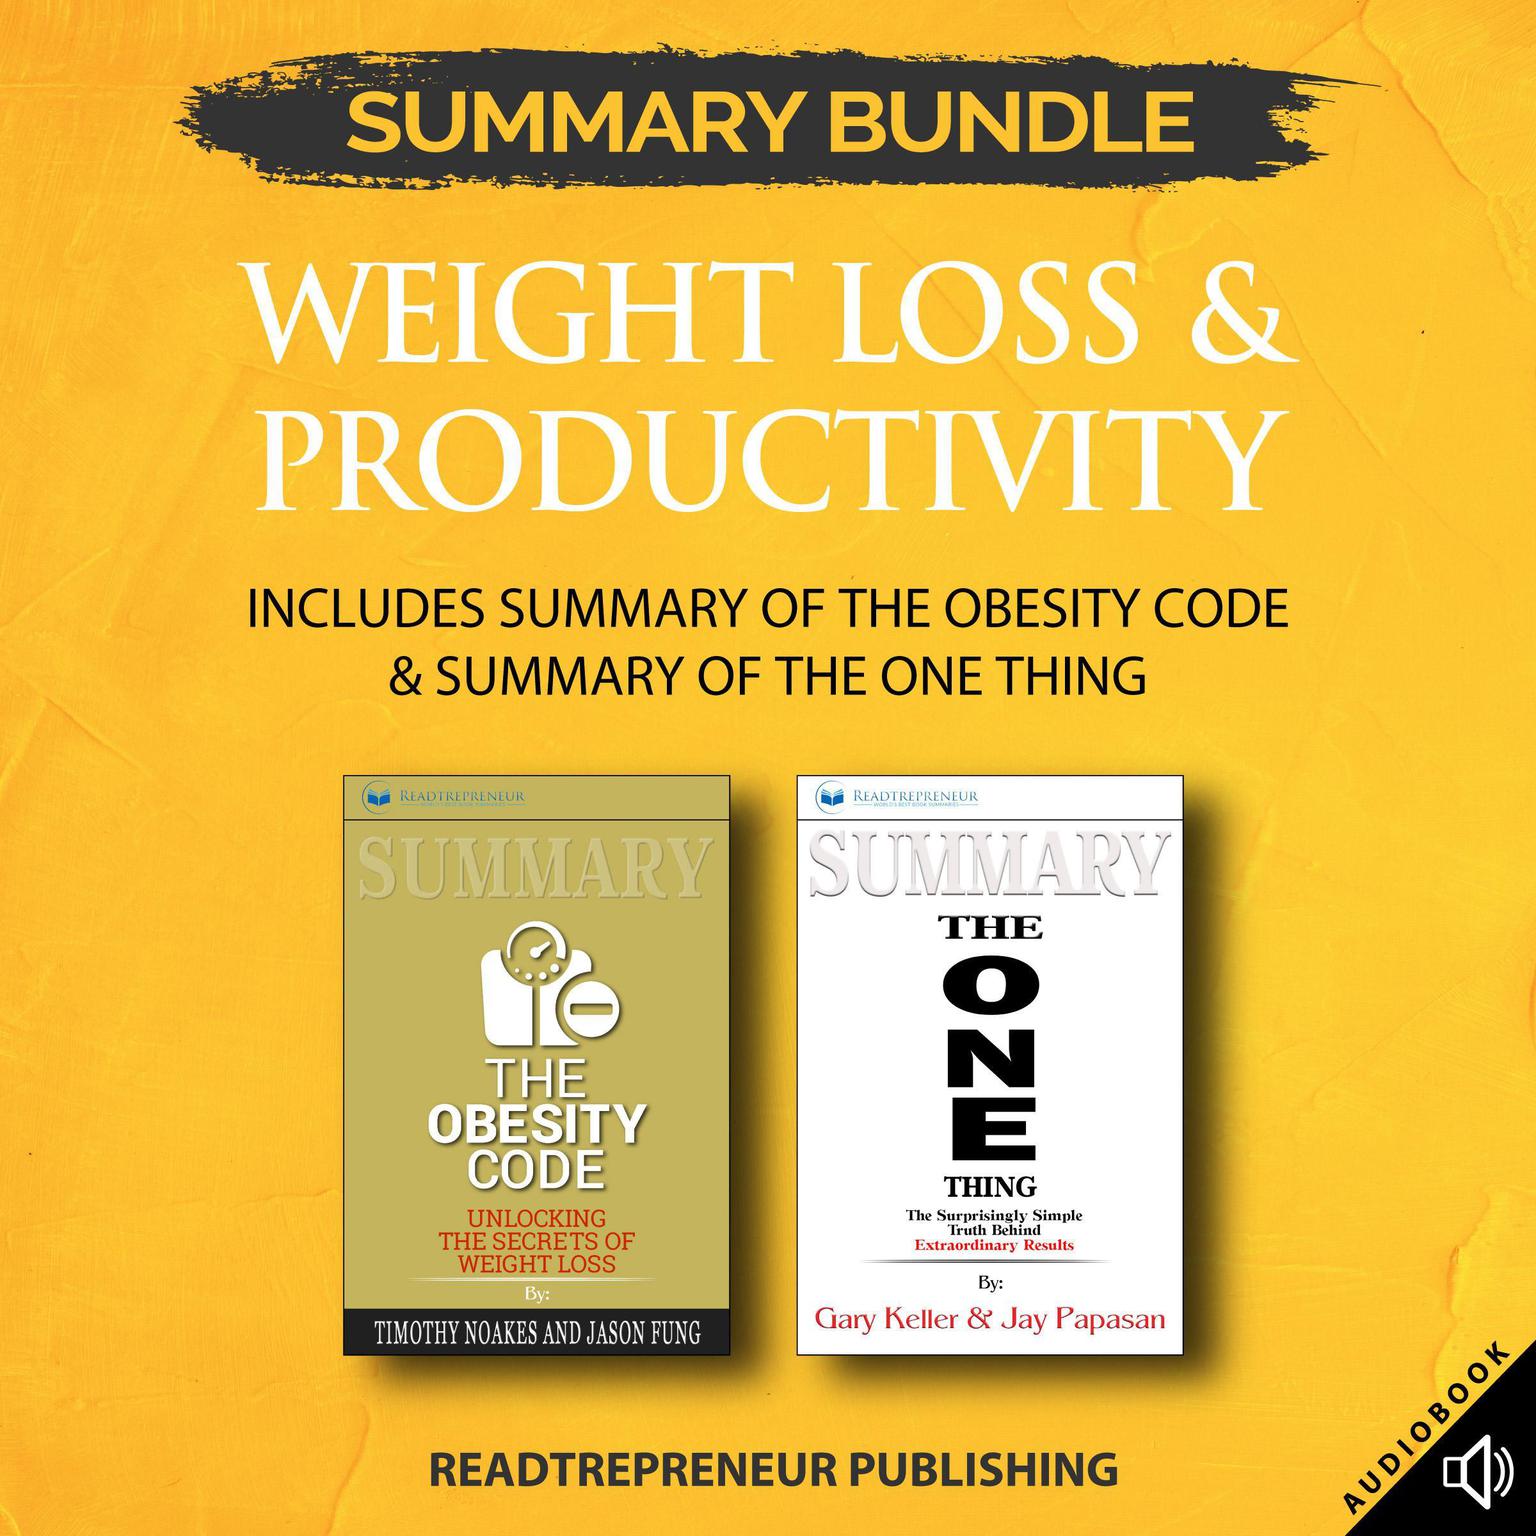 Summary Bundle: Weight Loss & Productivity | Readtrepreneur Publishing: Includes Summary of The Obesity Code & Summary of The ONE Thing Audiobook, by Readtrepreneur Publishing